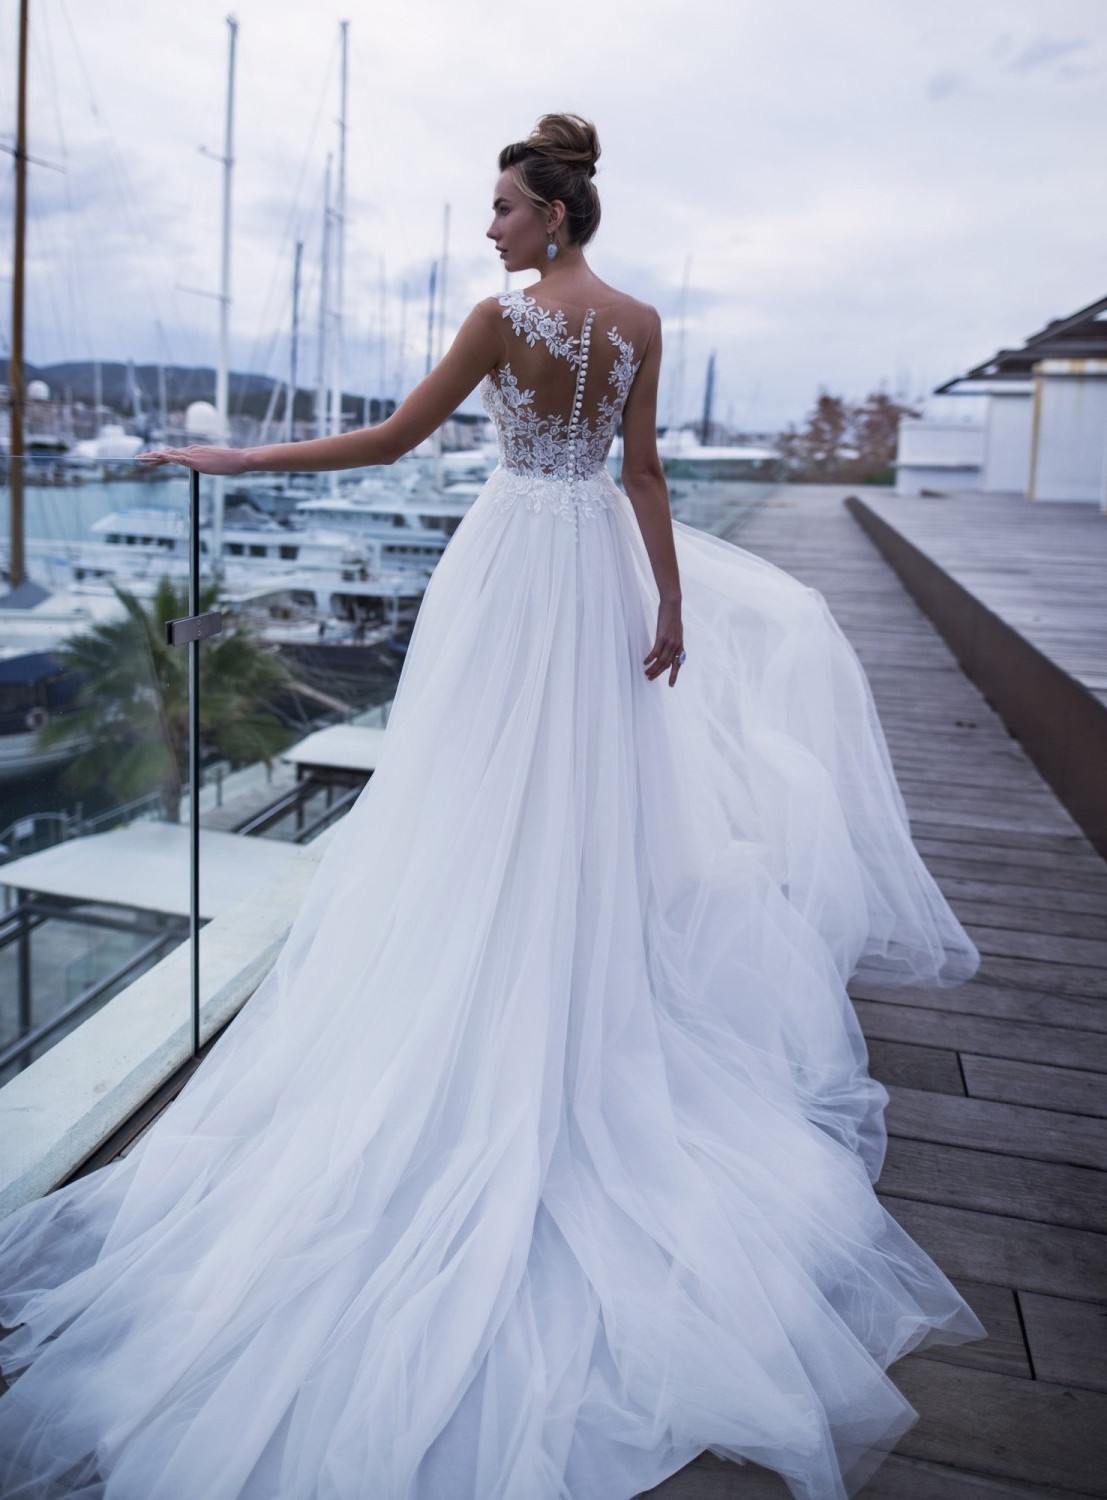 Amazing Lace Illusion Wedding Dress of all time Learn more here 